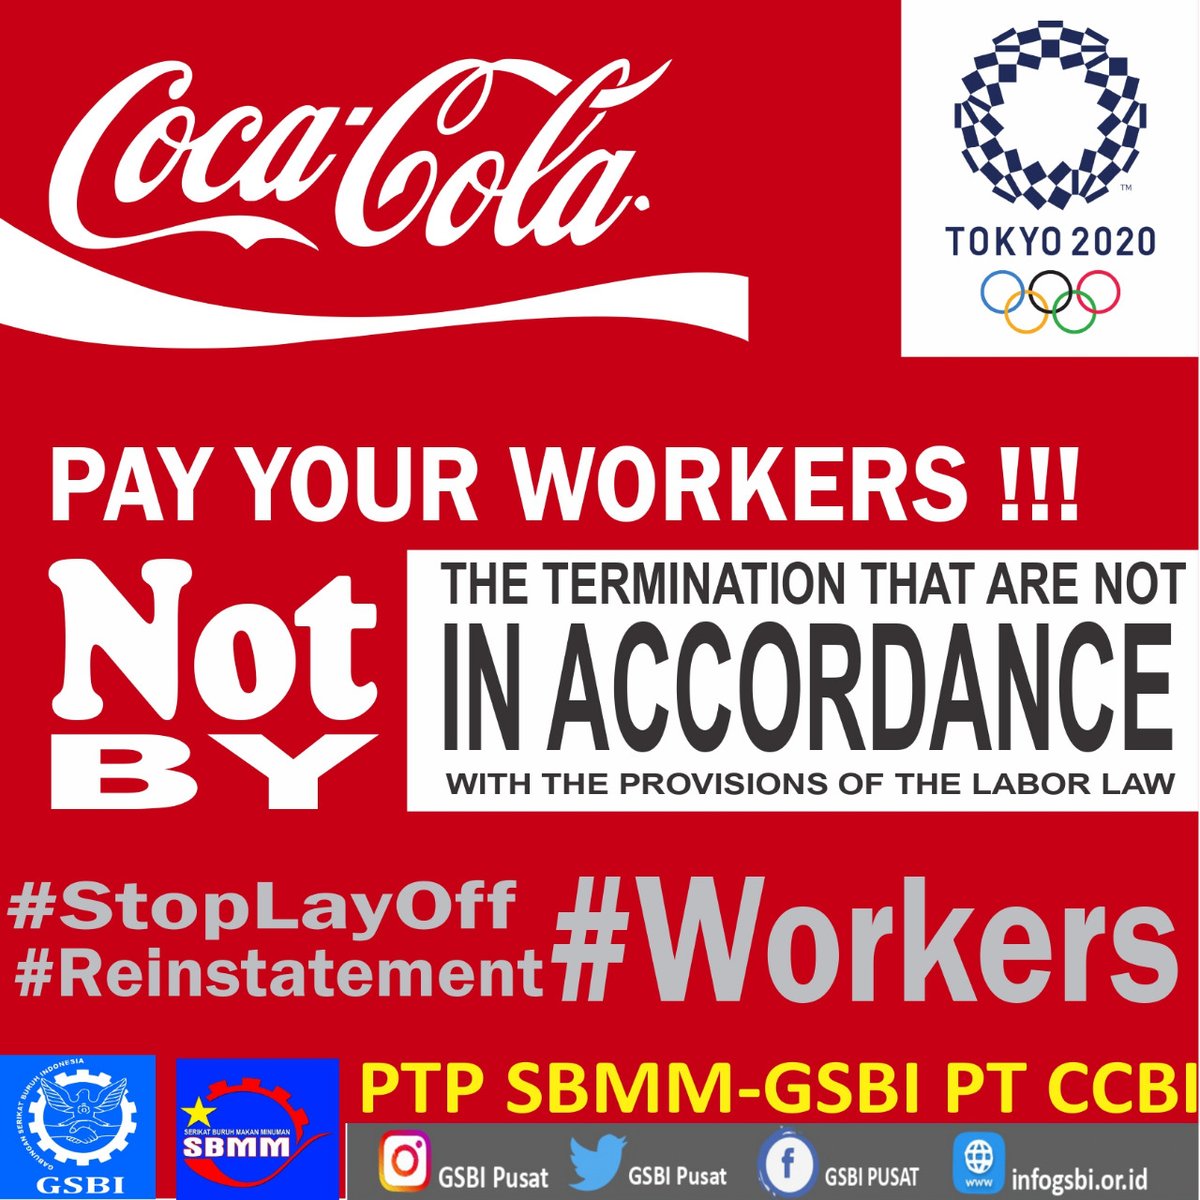 #CocaCola_Pay_Your_Workers #CocaCola_Pay_AmrunHakim_Rights #CocaCola_Pay_TotoSwarto_Rights #CocaCola_Pay_Jumhari_Rights #CocaCola_Pay_WahyuSetiawan_Rights #CocaCola_Pay_HengkiVirnando_Rights